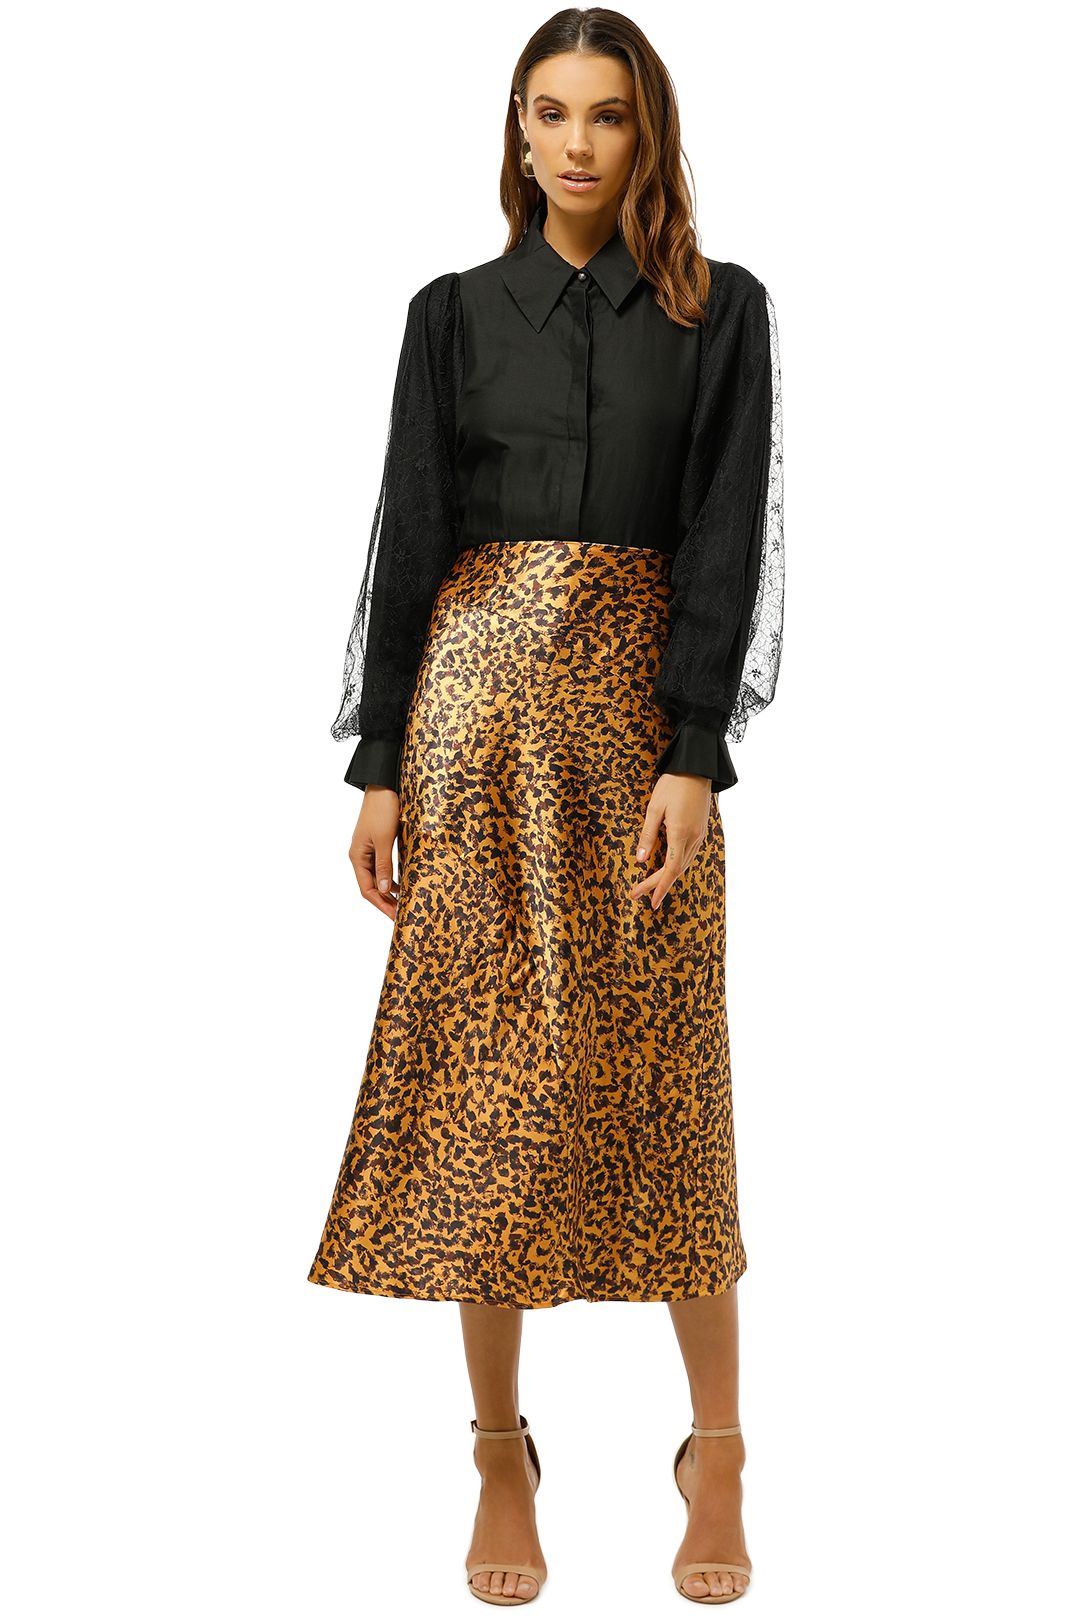 C/MEO-Collective-Polarised-Skirt-Mustard-Painted-Spot-Front